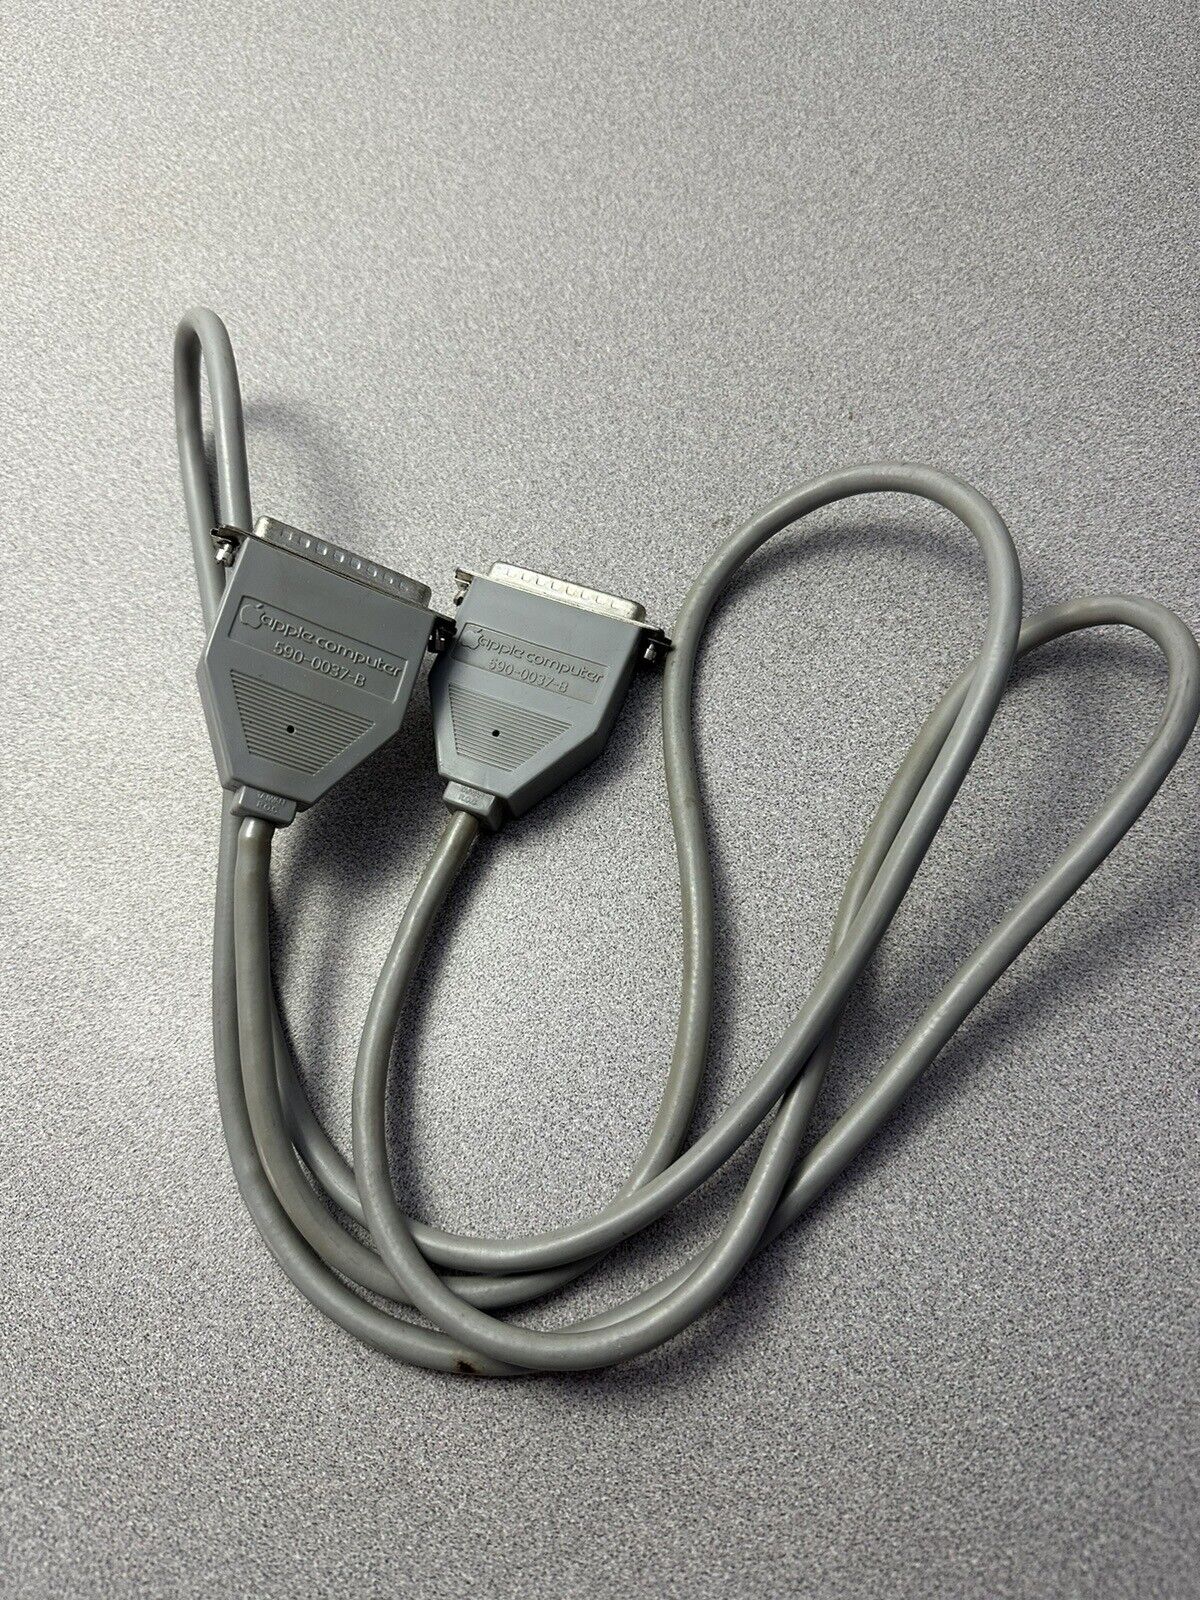 VINTAGE OEM Apple Computer 590-0037-B Serial Modem Cable, 25 Pin Male/Male